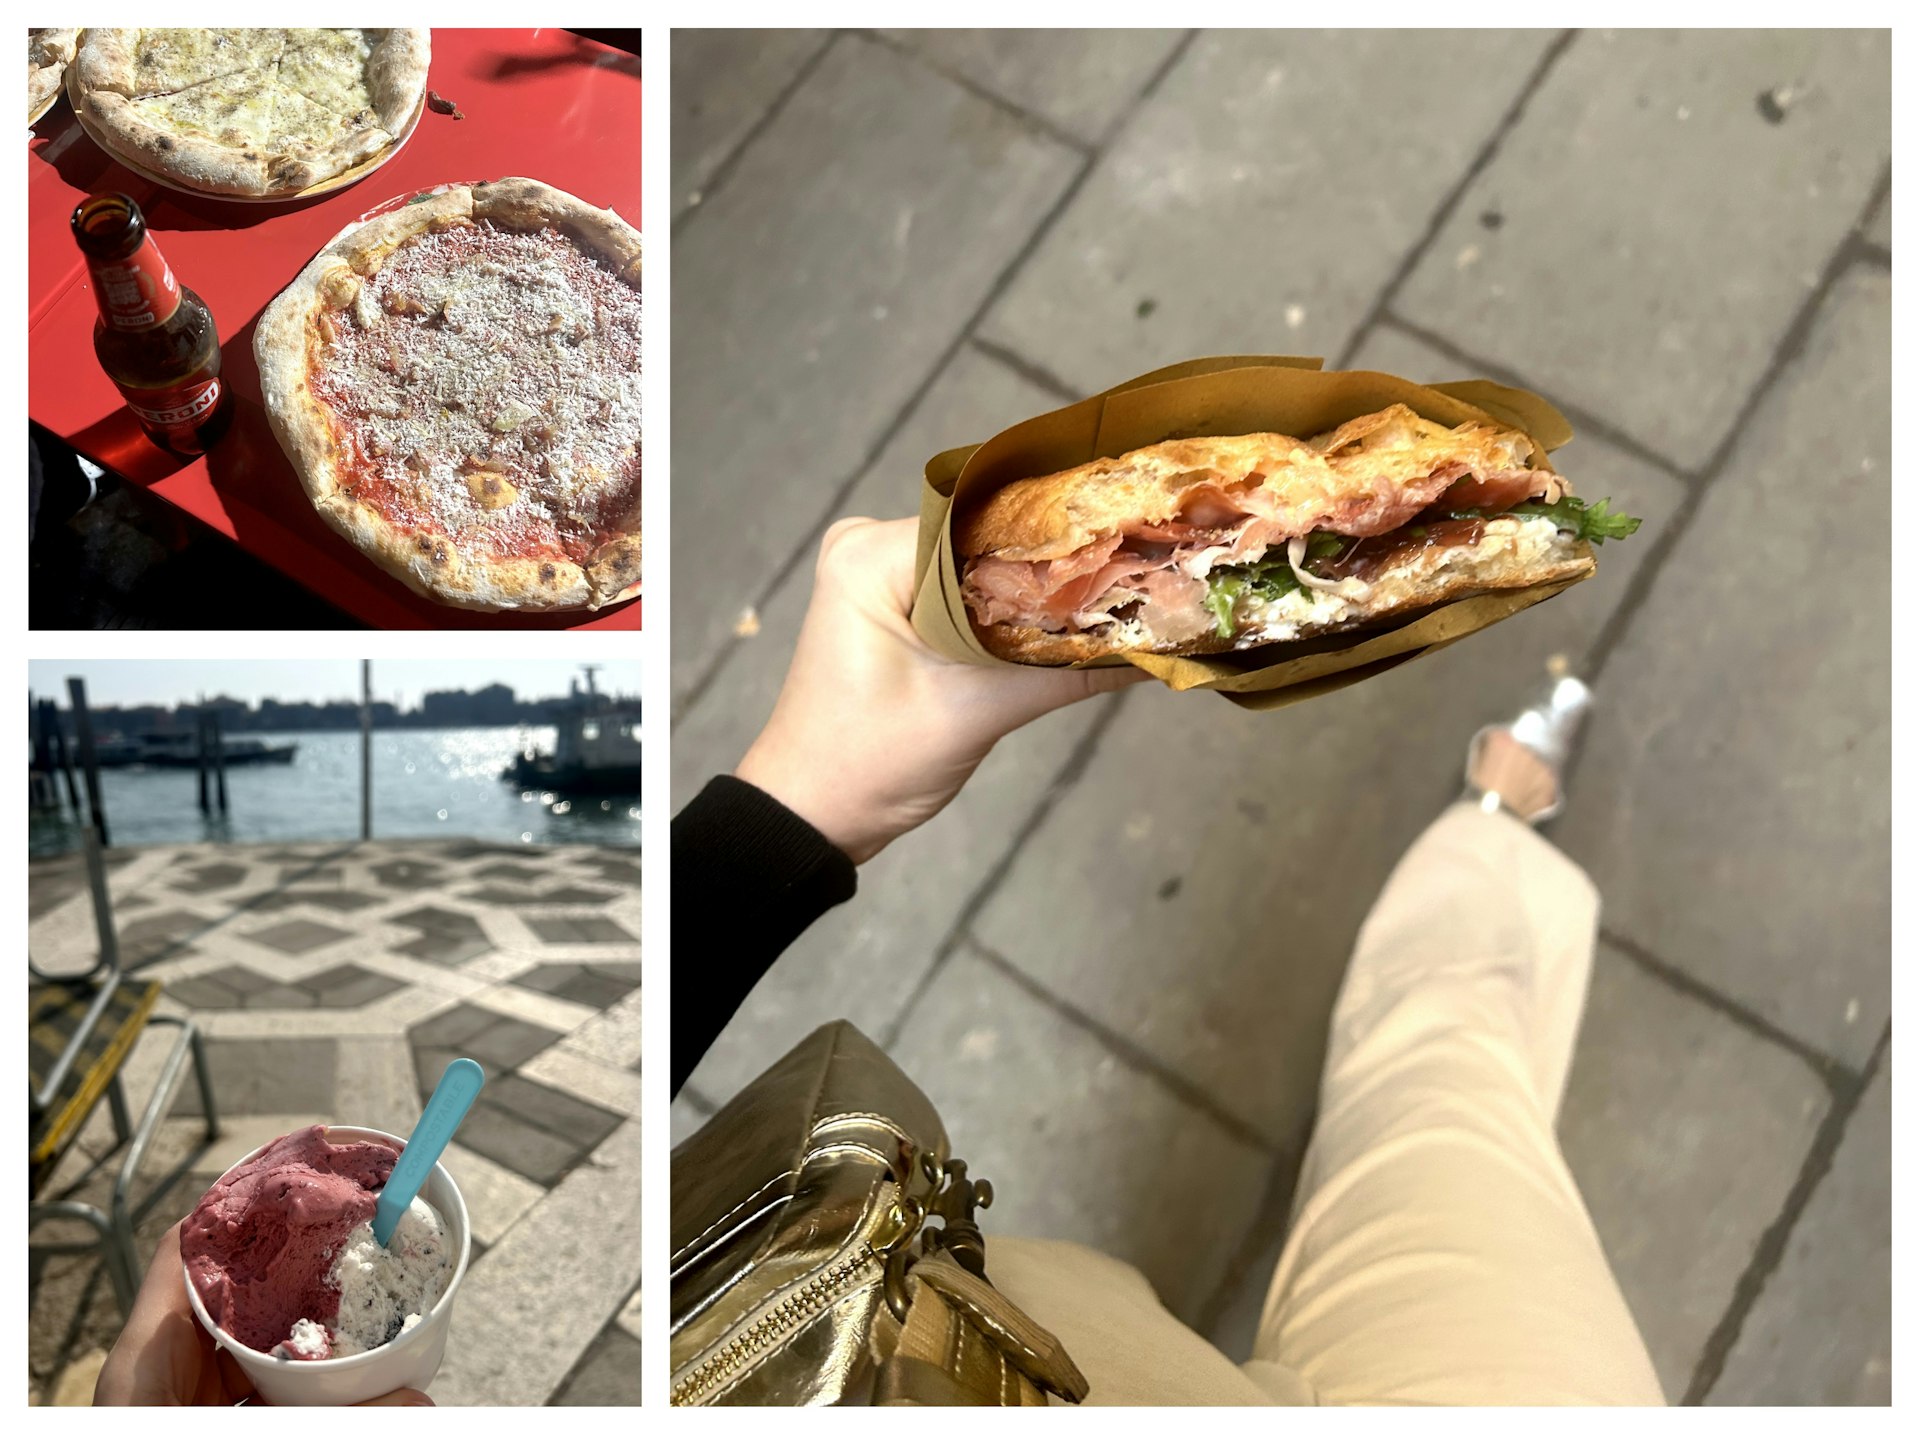 Top left: a whole pizza and a beer; Bottom left: gelato with a view of a canal in Venice; Right: walking while holding a sandwich